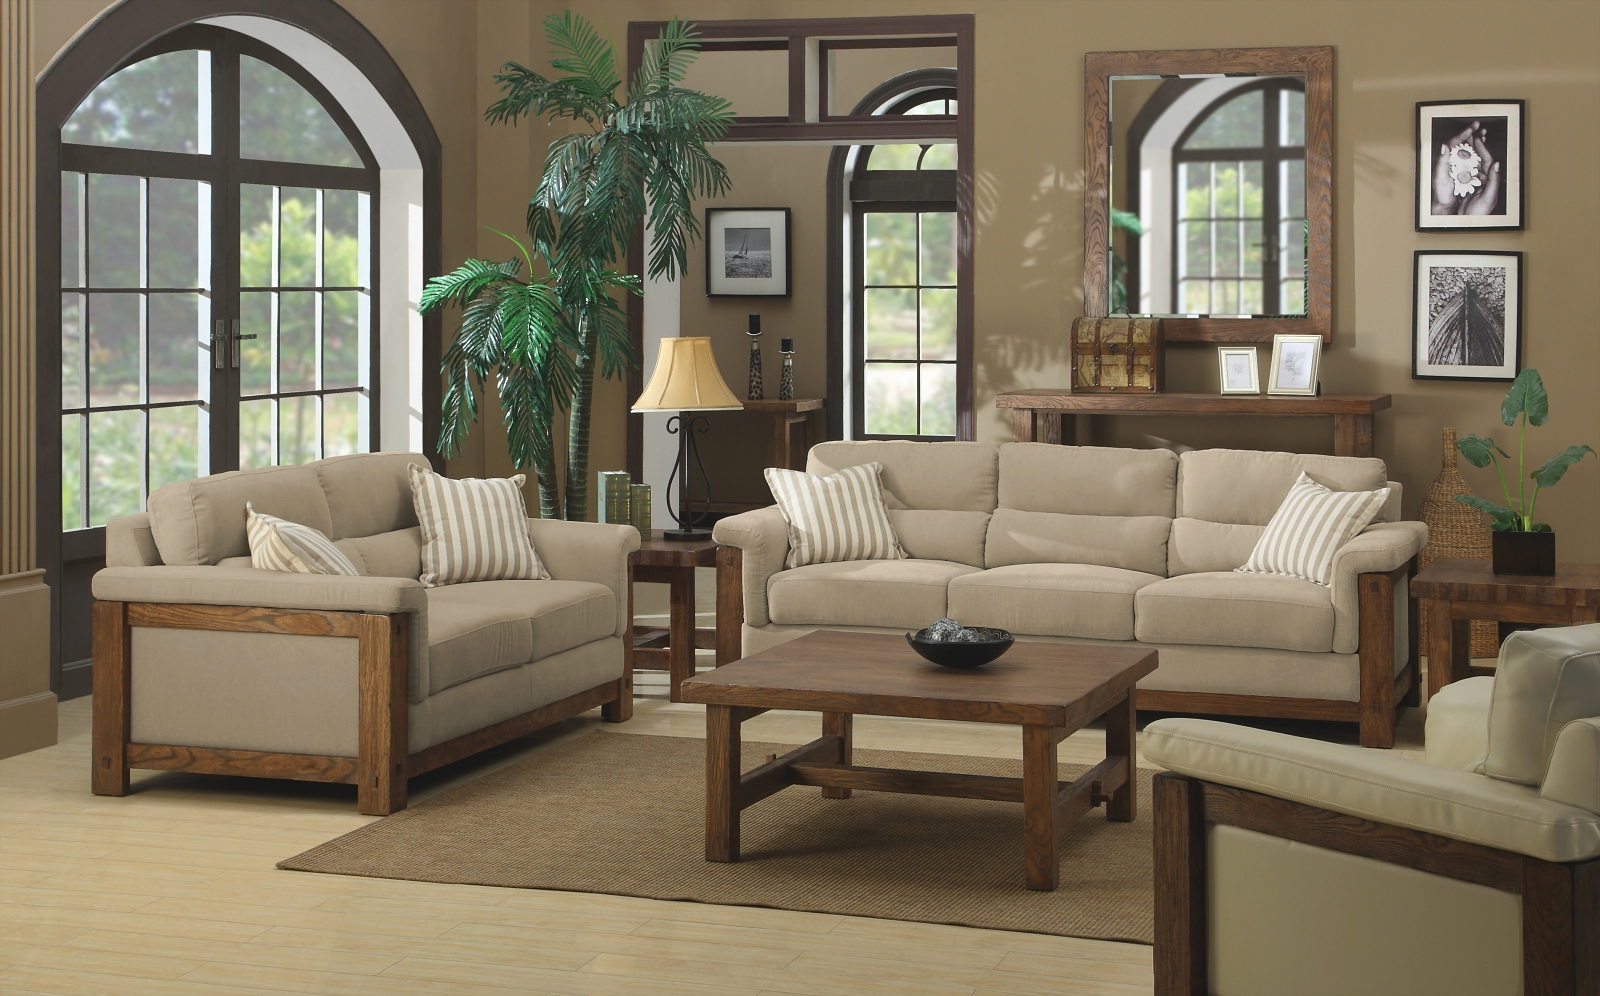 Beige Colour Combination For Living Room